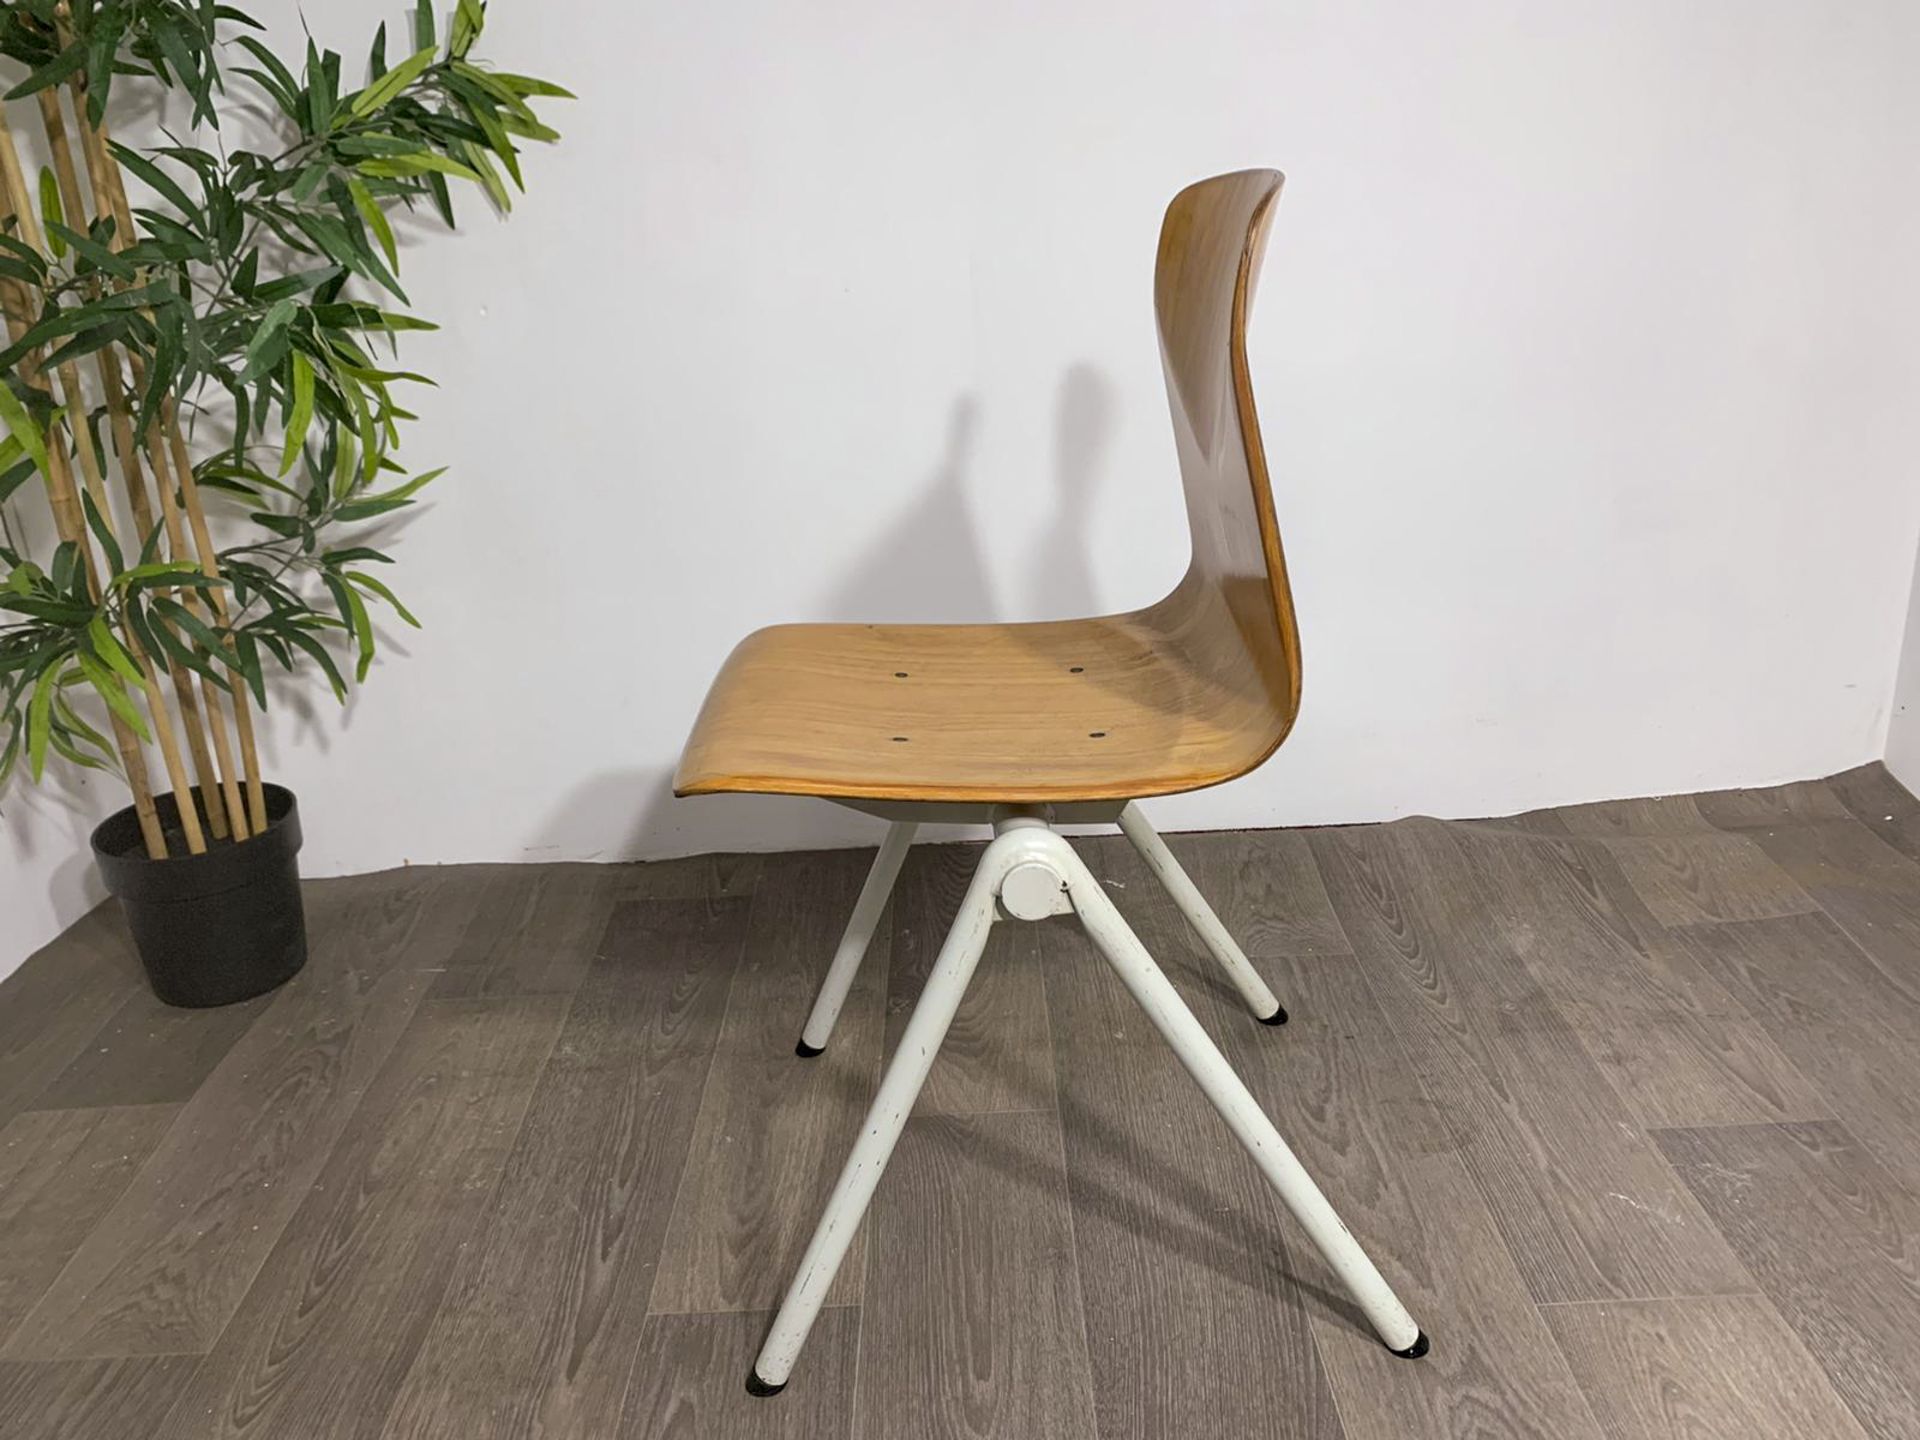 Mid Century Wooden Chair with Steel Legs - Image 2 of 9